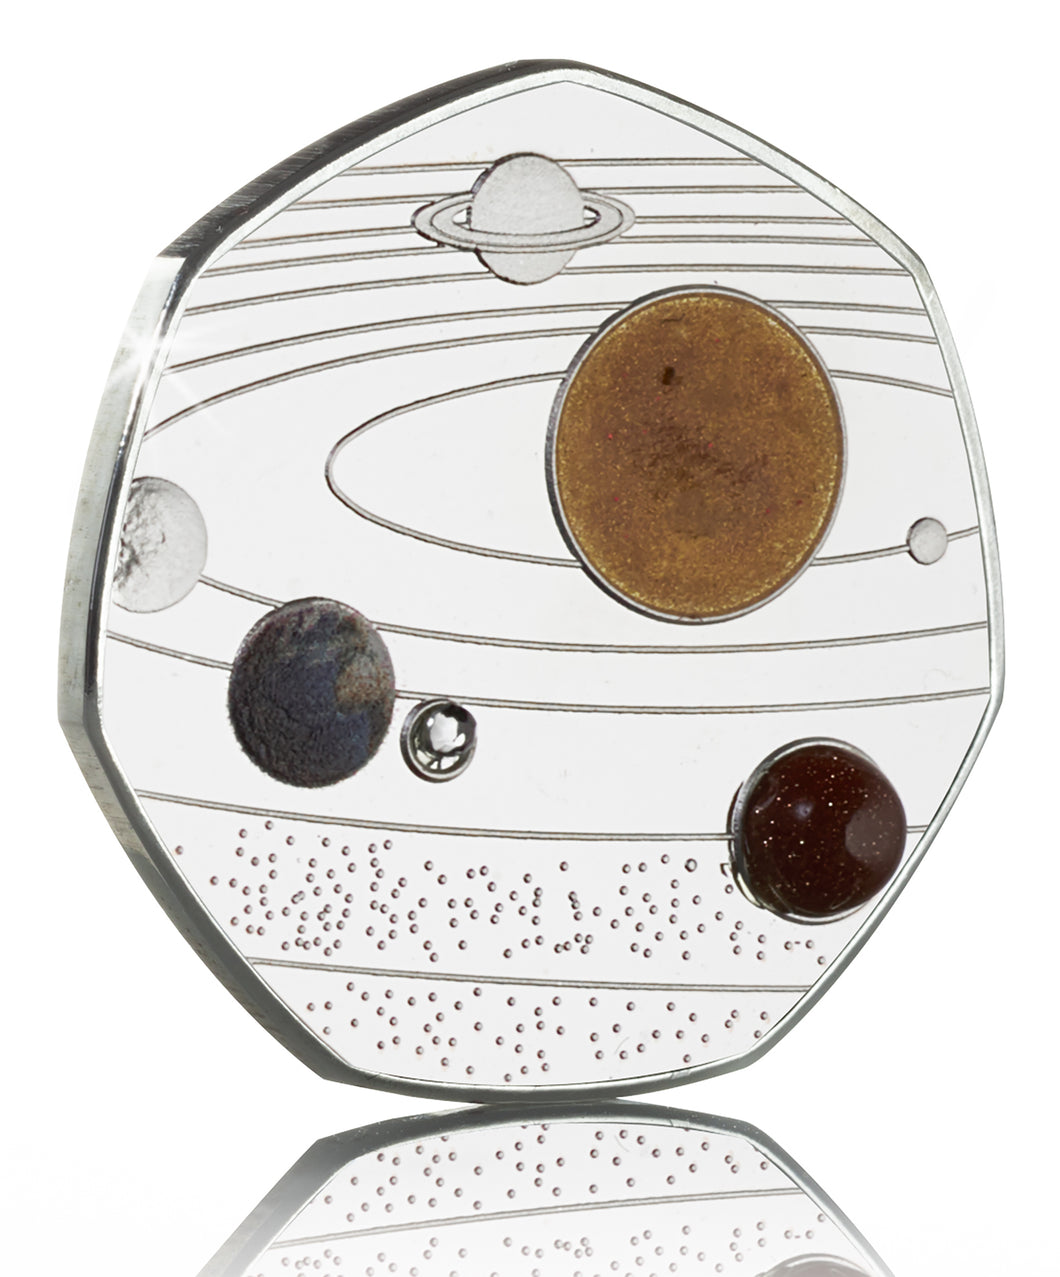 Our Solar System - Silver with Diamante, Colour & Shimmer/Sparkle Elements